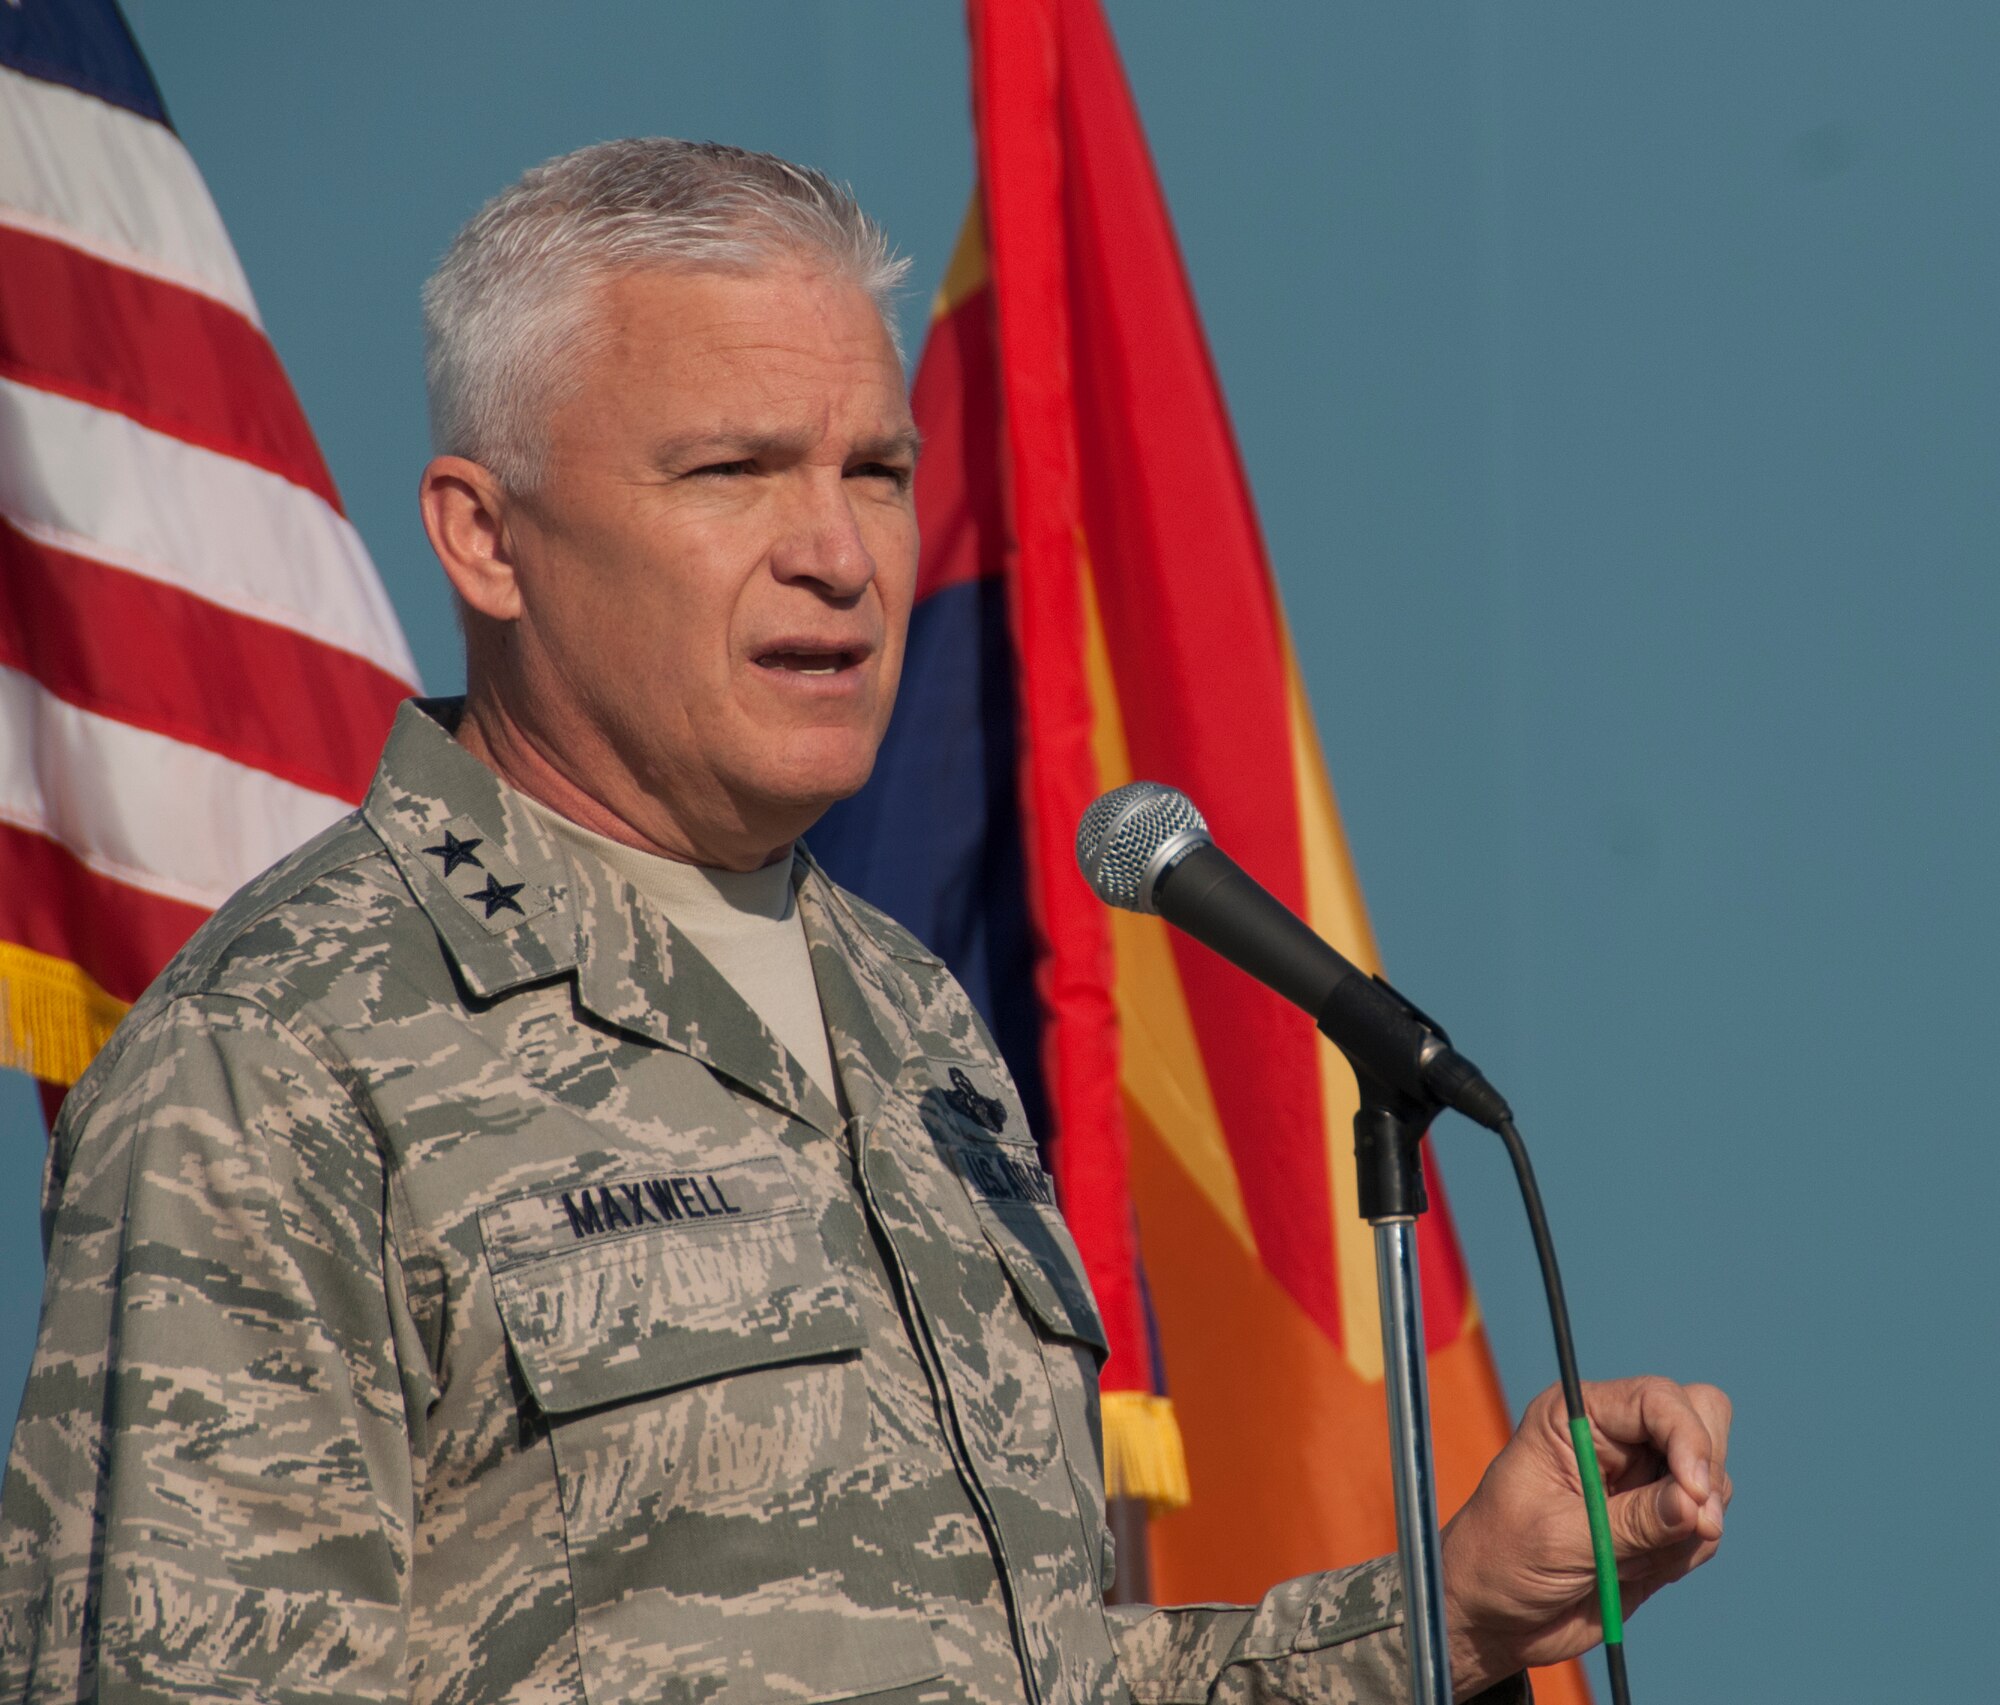 Maj. Gen. Edward Maxwell, Arizona Air National Guard commander, delivers remarks to the 162nd Wing during the annual awards ceremony at the Tucson International Airport June 5, 2016. Thank you for being part of the team, thank you for serving, thank you for being part of the premiere wing in the Air National Guard, said Maxwell. The ceremony included individual and team awards from the Wing, community, major command and Air National Guard. (U.S. Air National Guard photo by Staff Sgt. Greg Ferreira)